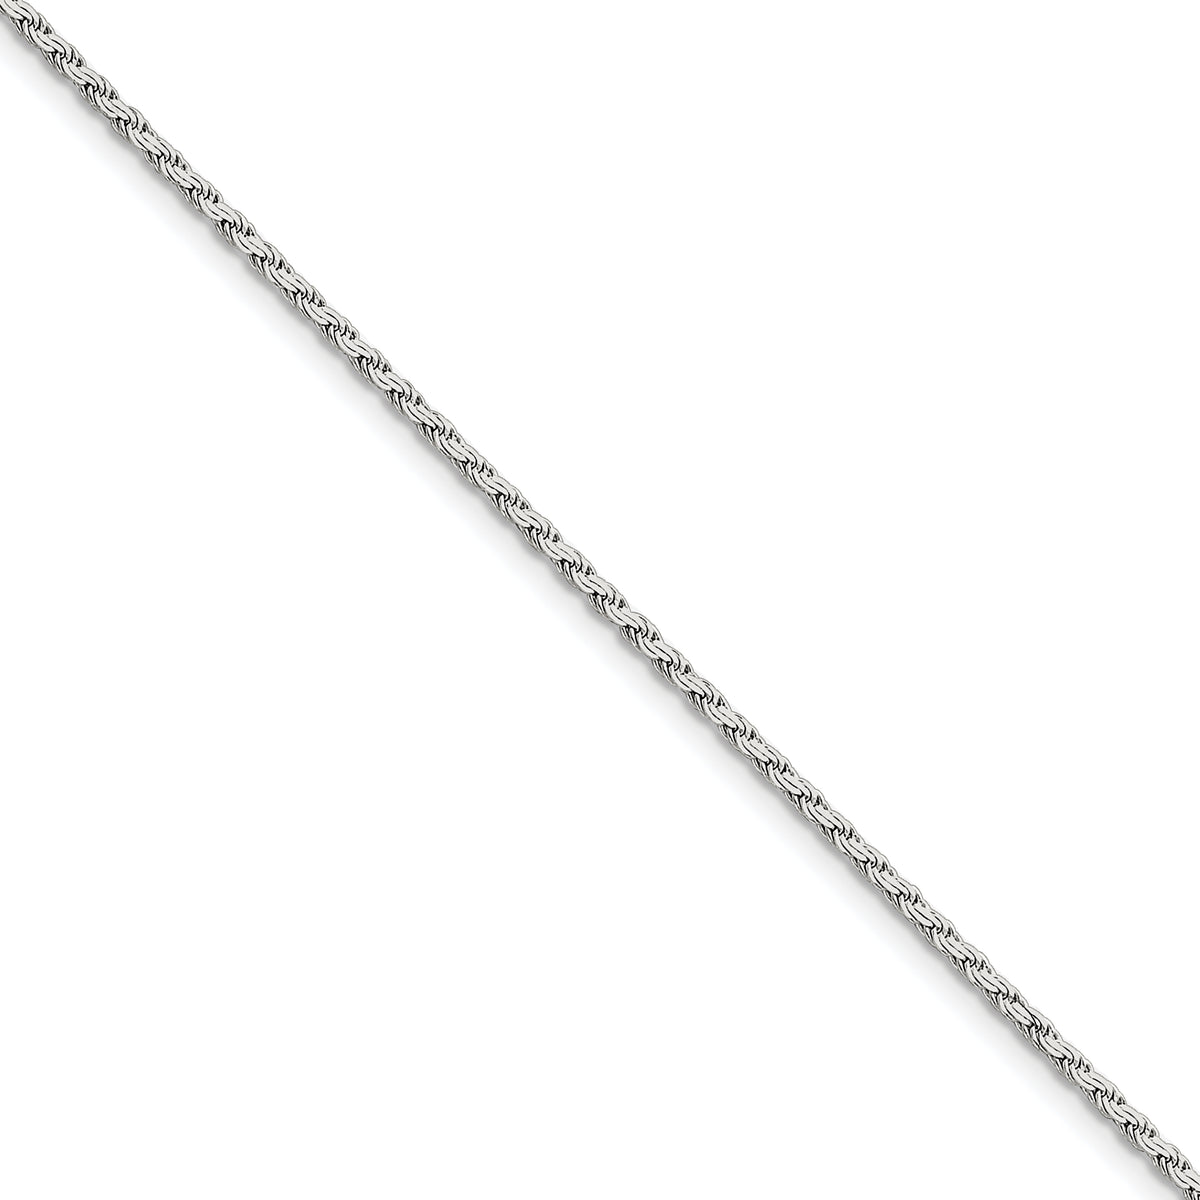 Sterling Silver 2.25mm Flat Rope Chain